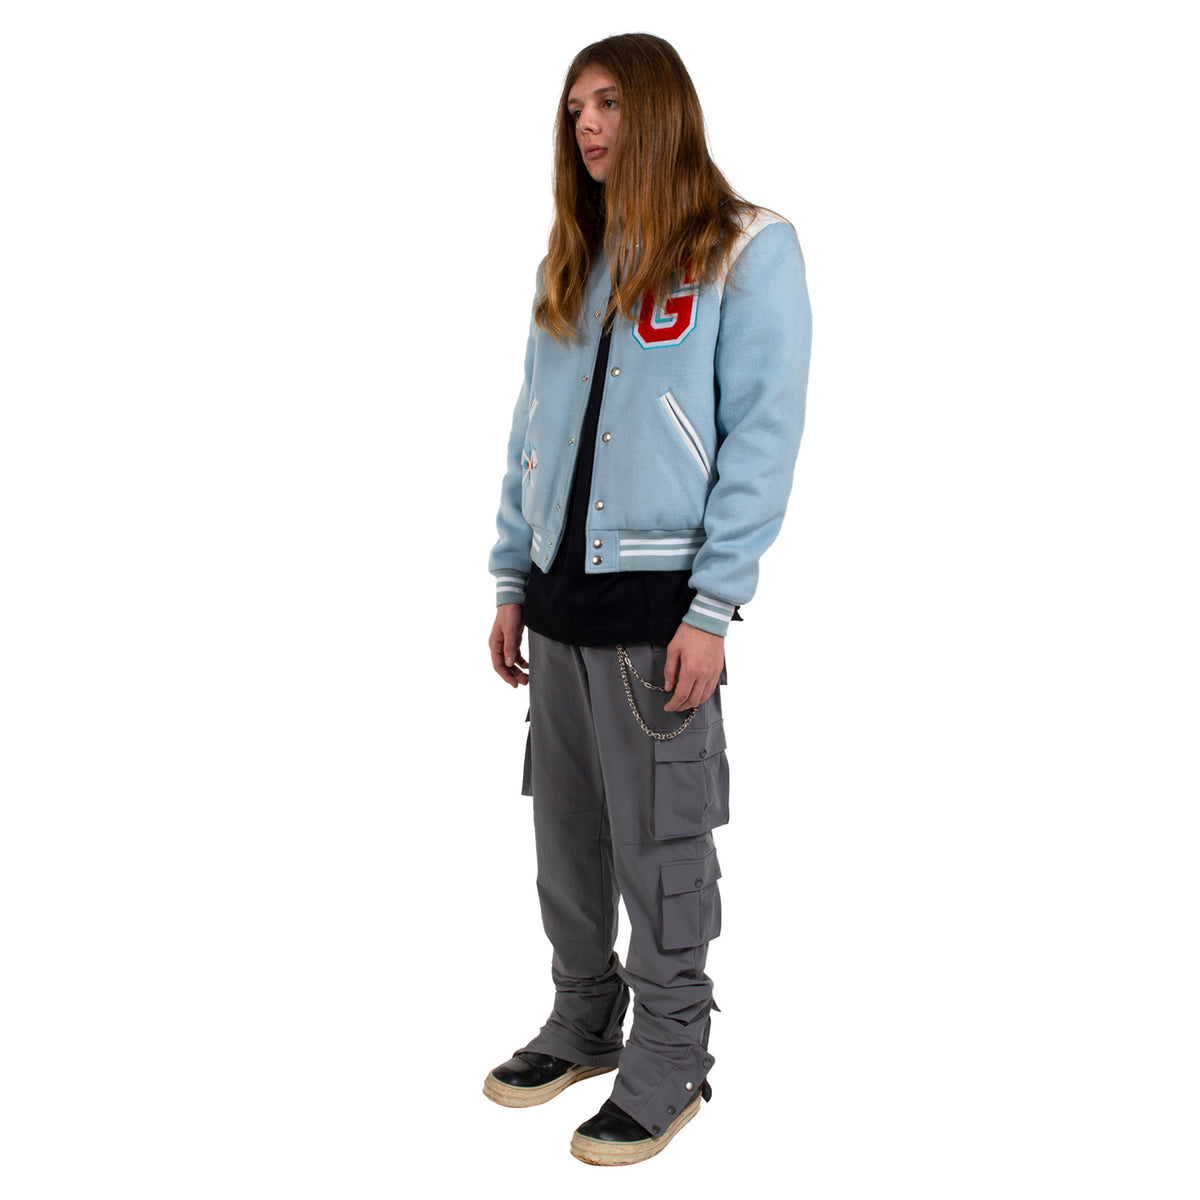 Embroidered Vines Varsity Jacket in Sky Blue XL